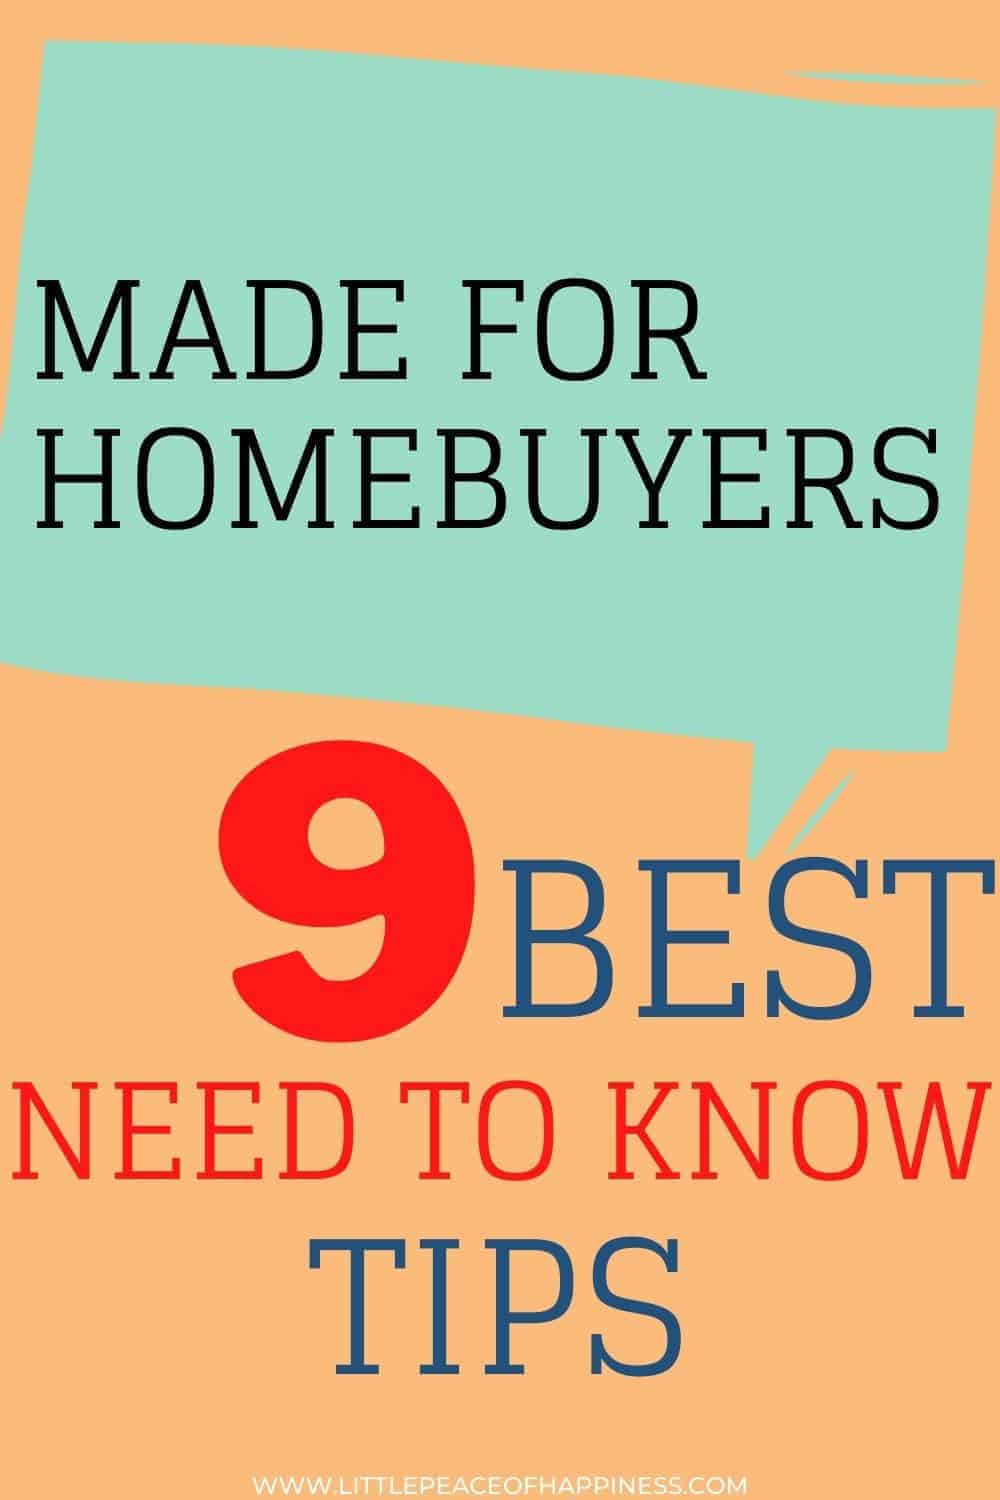 9 best tips for homebuyers